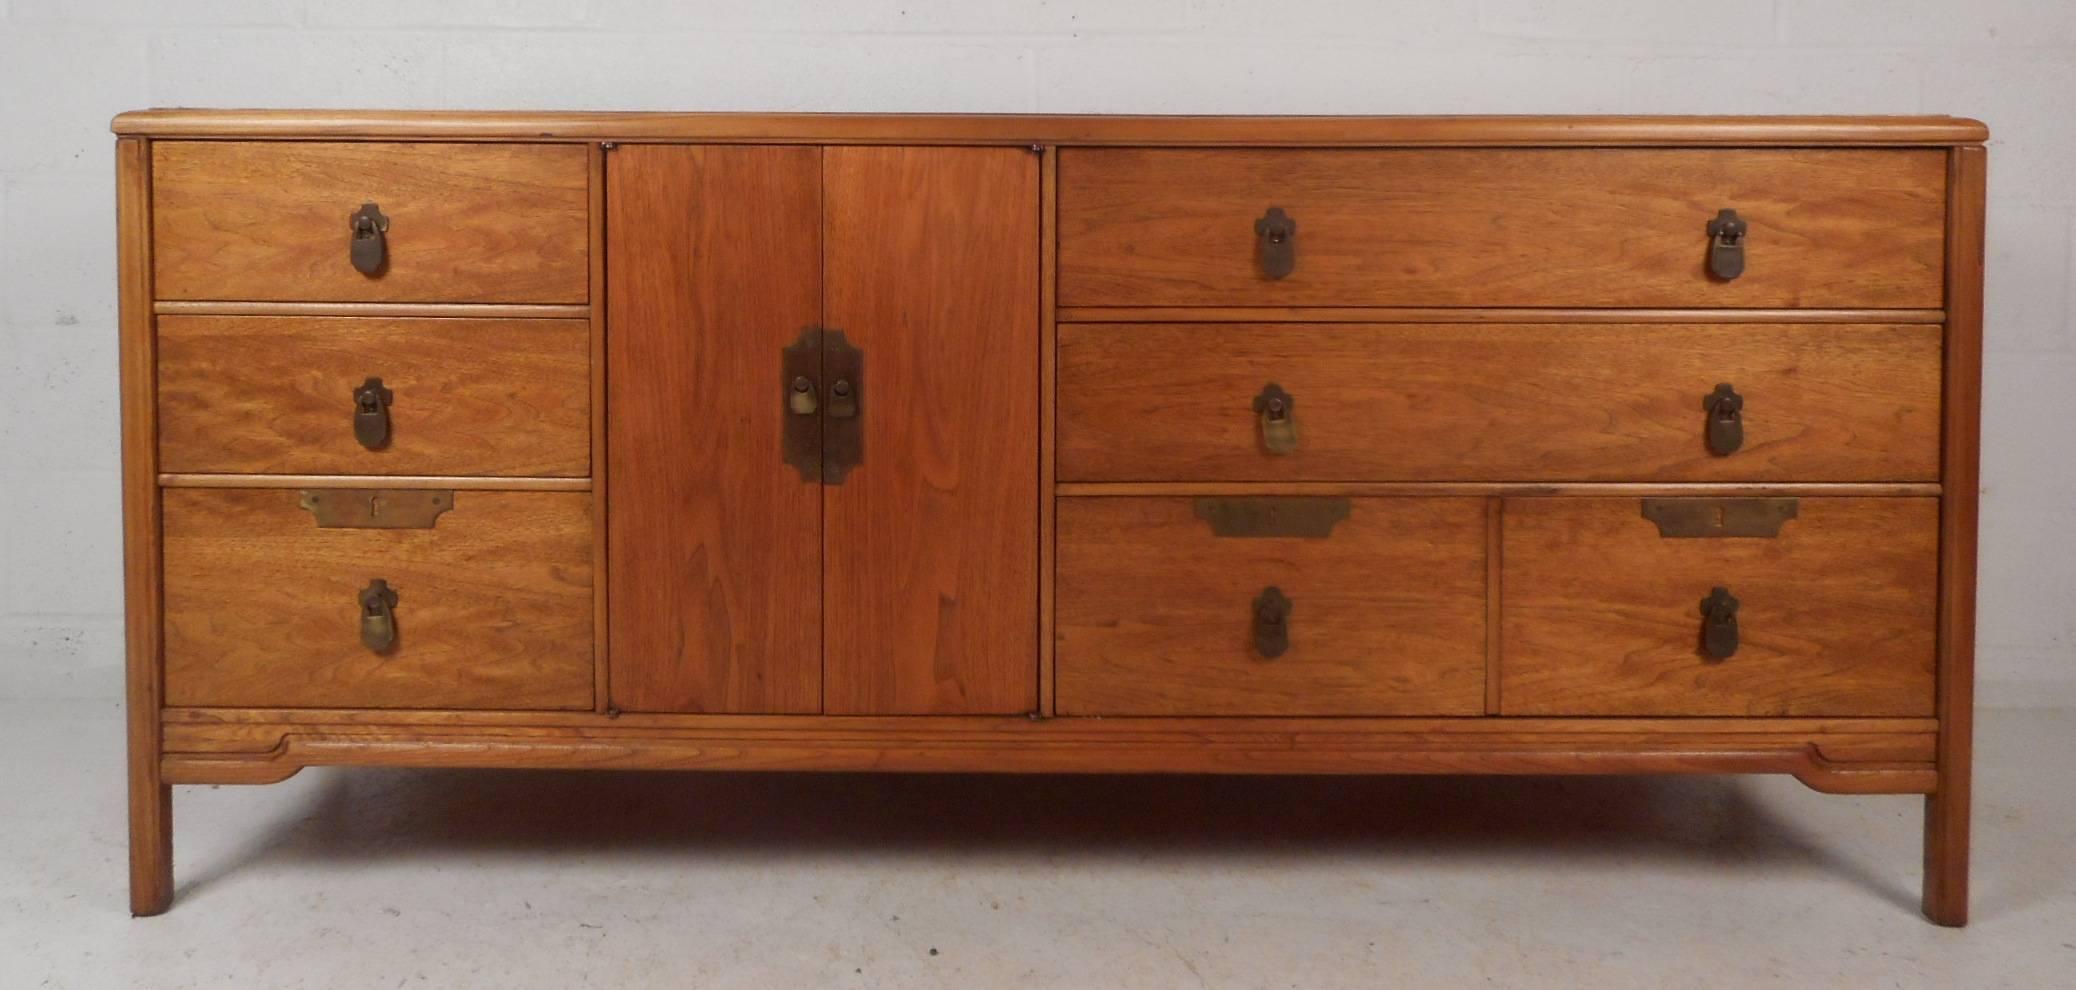 This stunning vintage modern dresser features nine hefty drawers with three hidden behind two cabinet doors. Sleek design with unique brass pulls on fixtures and stylish inlays on the top. This beautiful Mid-Century case piece has oak trim with